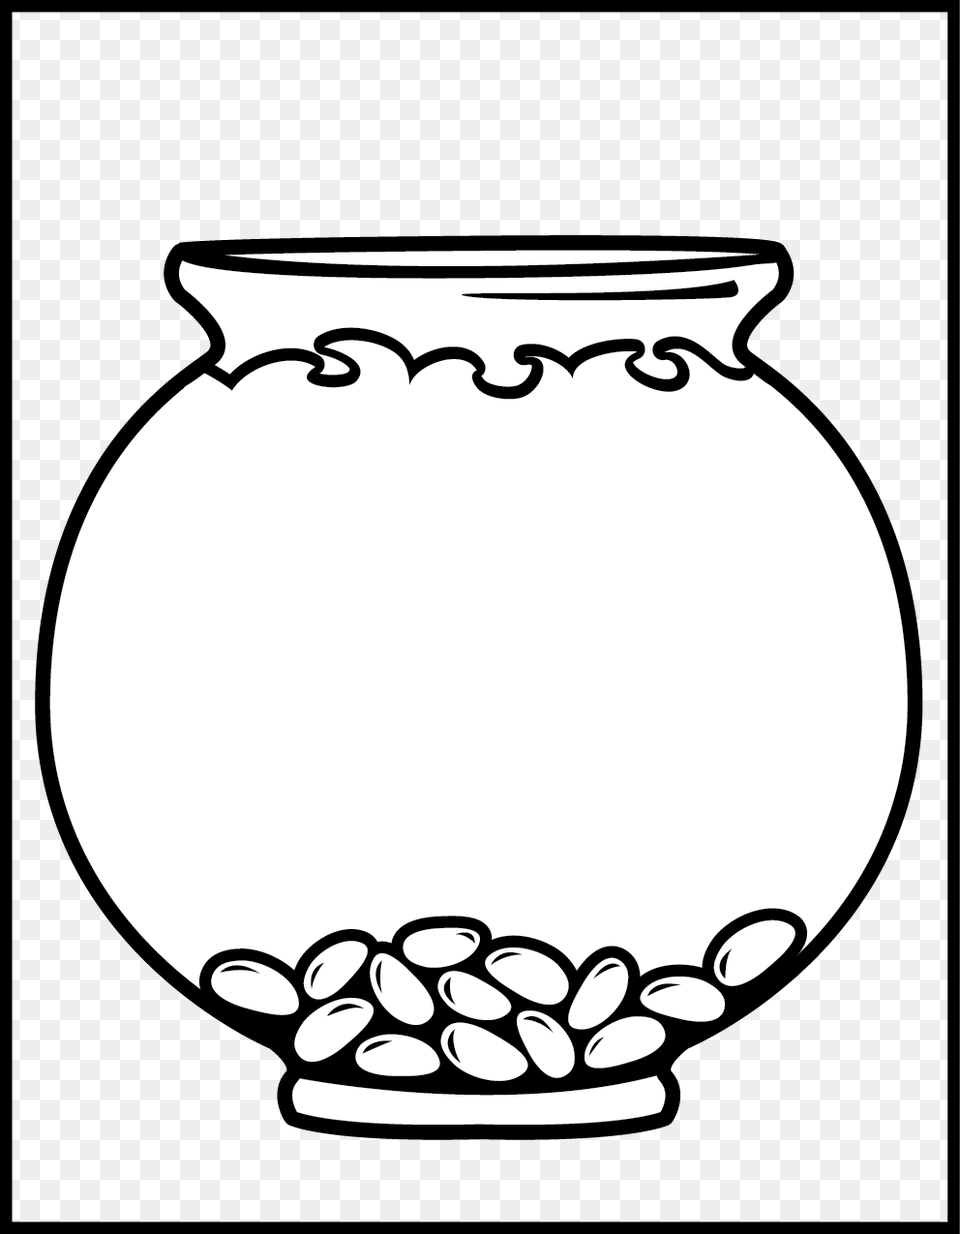 Zcards, Jar, Pottery, Vase, Smoke Pipe Png